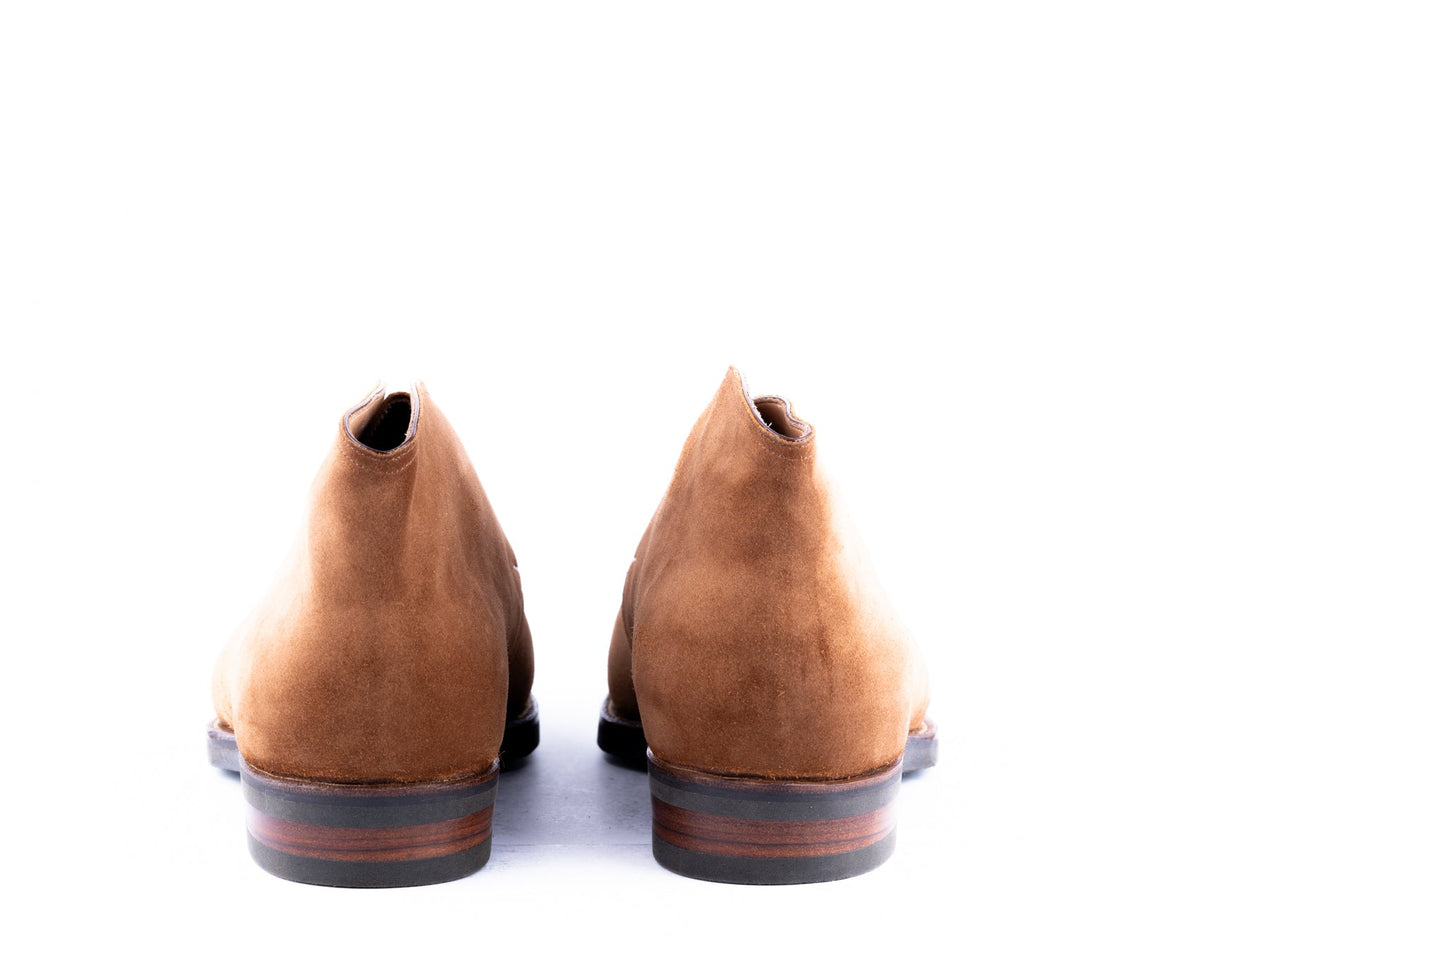 Chukka boots with two eylets, curved topline